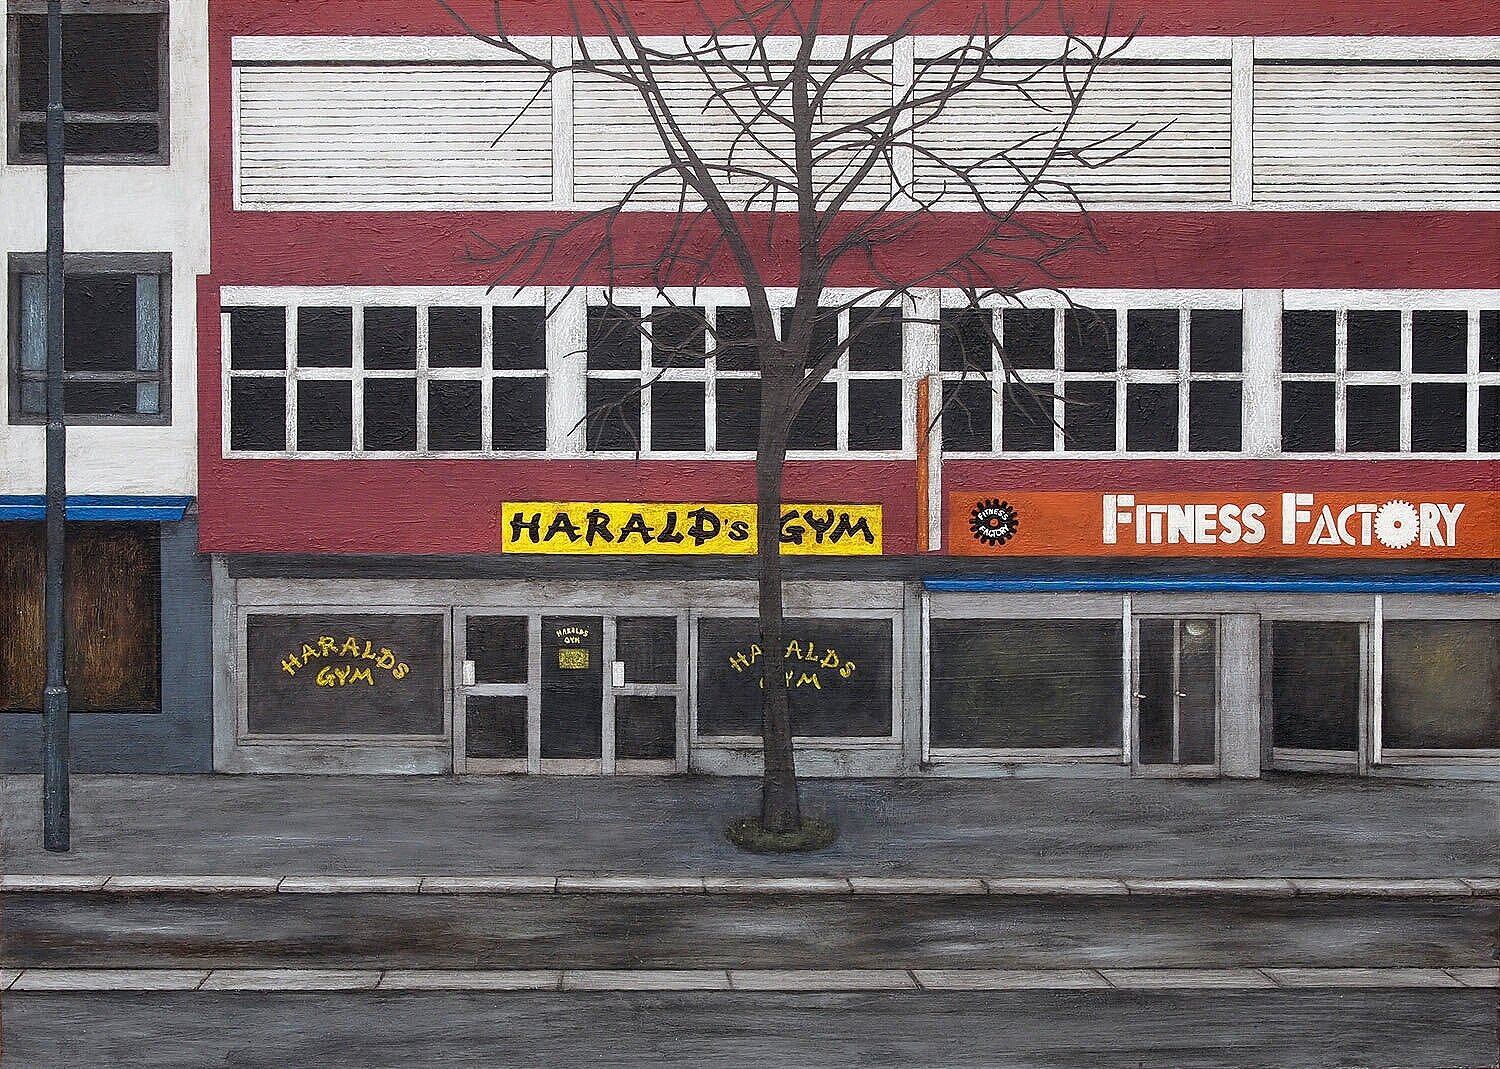   Haralds Gym,  acrylic and coloured pencil on mdf, 50 x 70 cm (2018) 